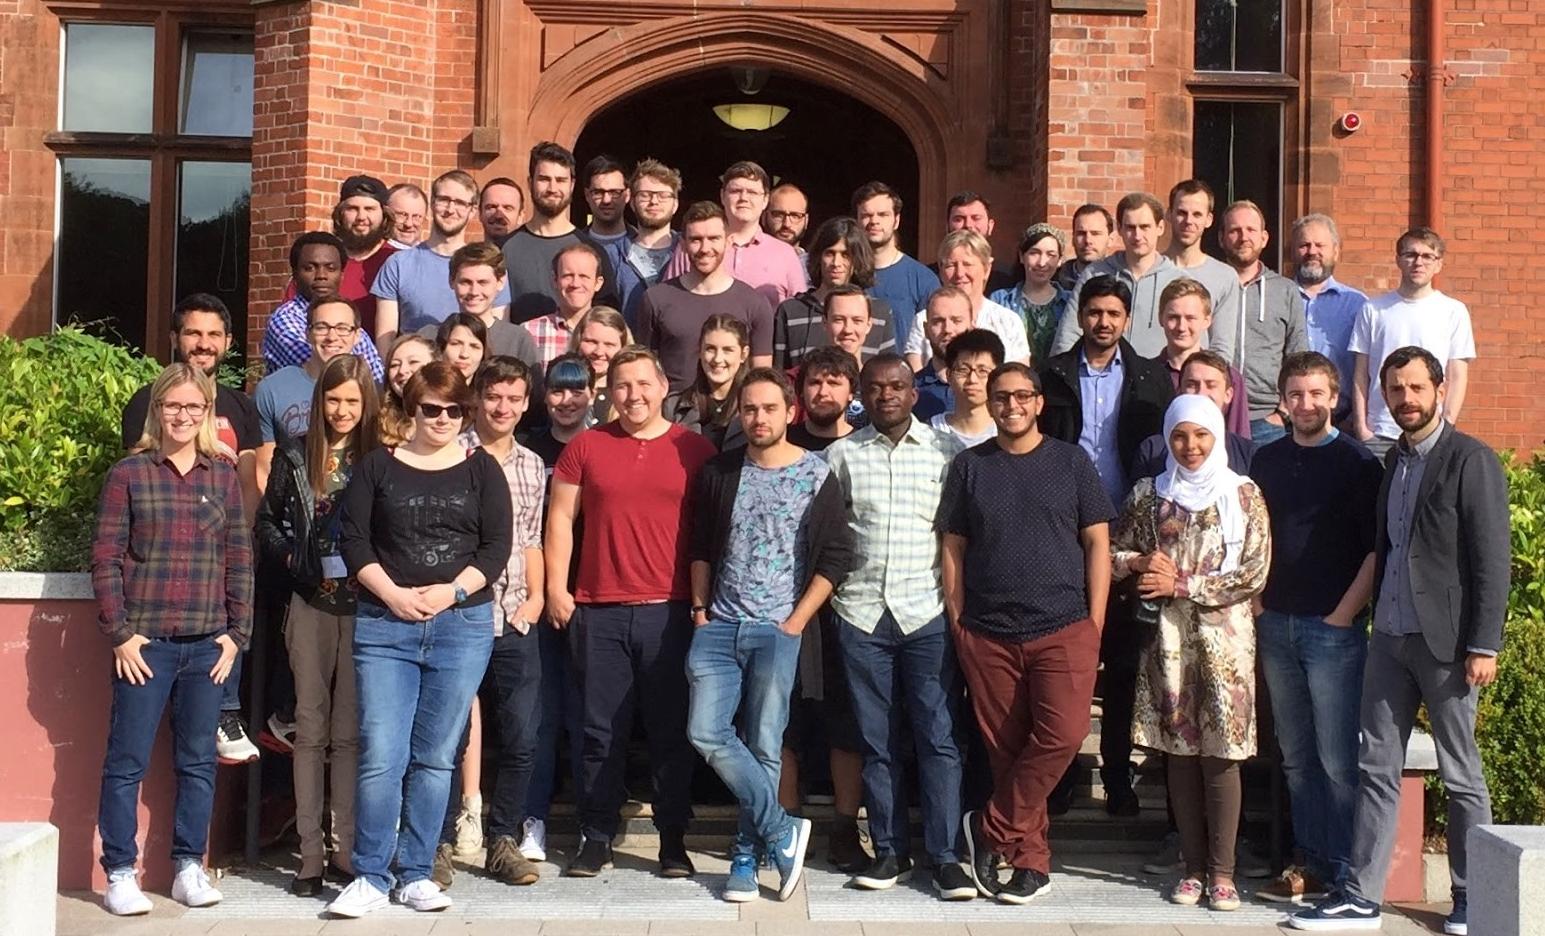 Attendees of the UK STFC Postgraduate Nuclear Physics Summer School